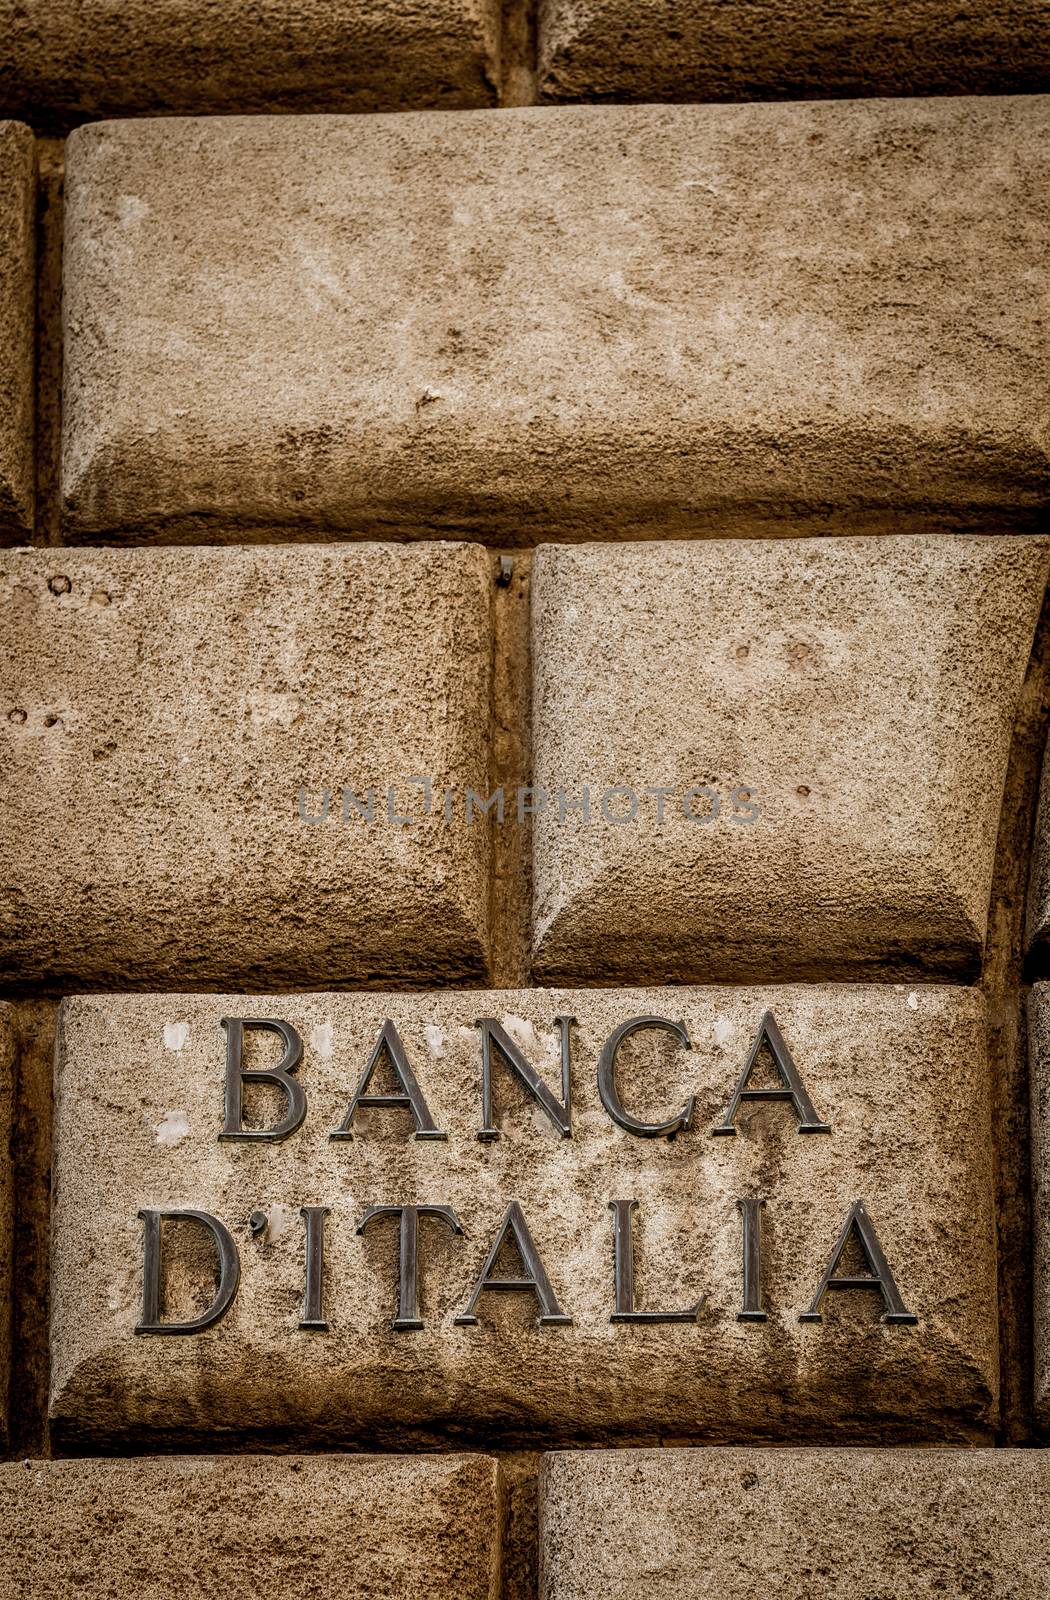 Banca d'Italia (bank of Italy) text on an old wall close to the entrance of the institute in Lecce